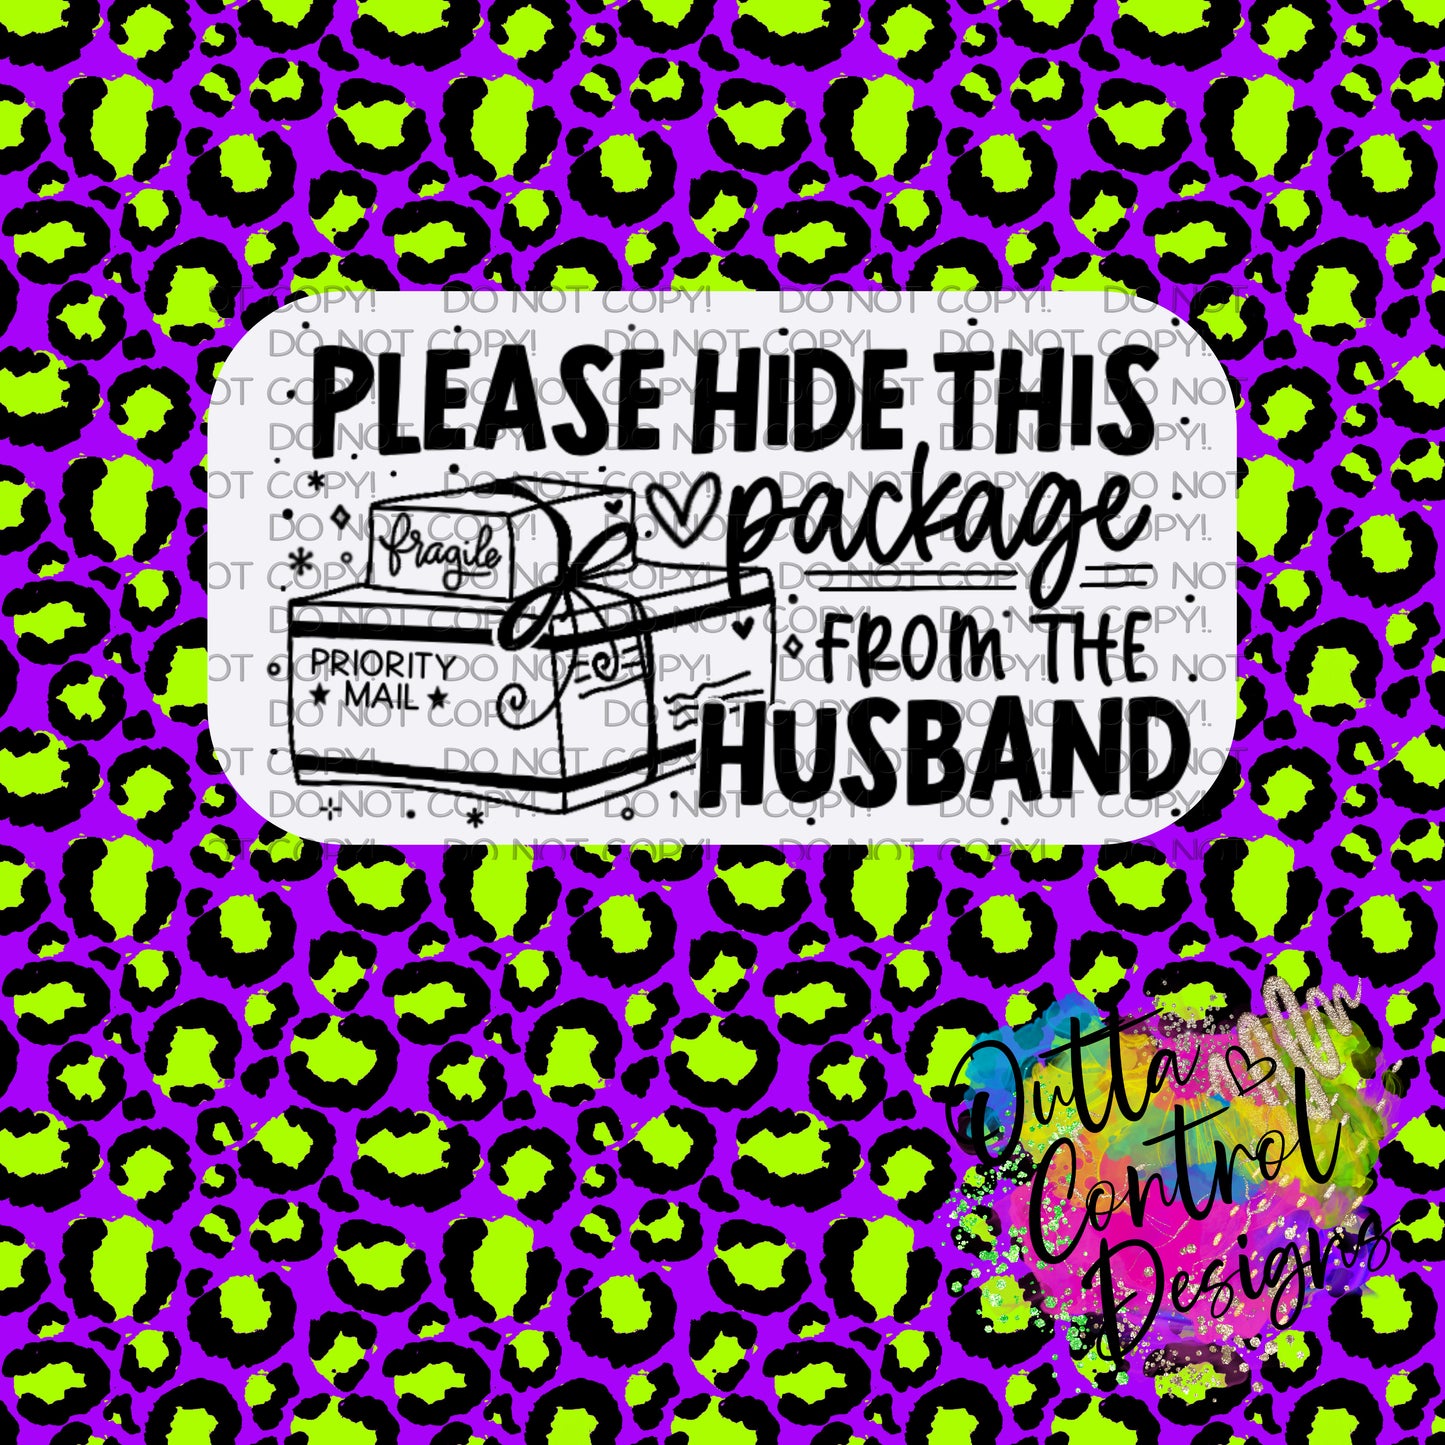 Please hide my packages from the Husband Thermal Sticker (25 per order)